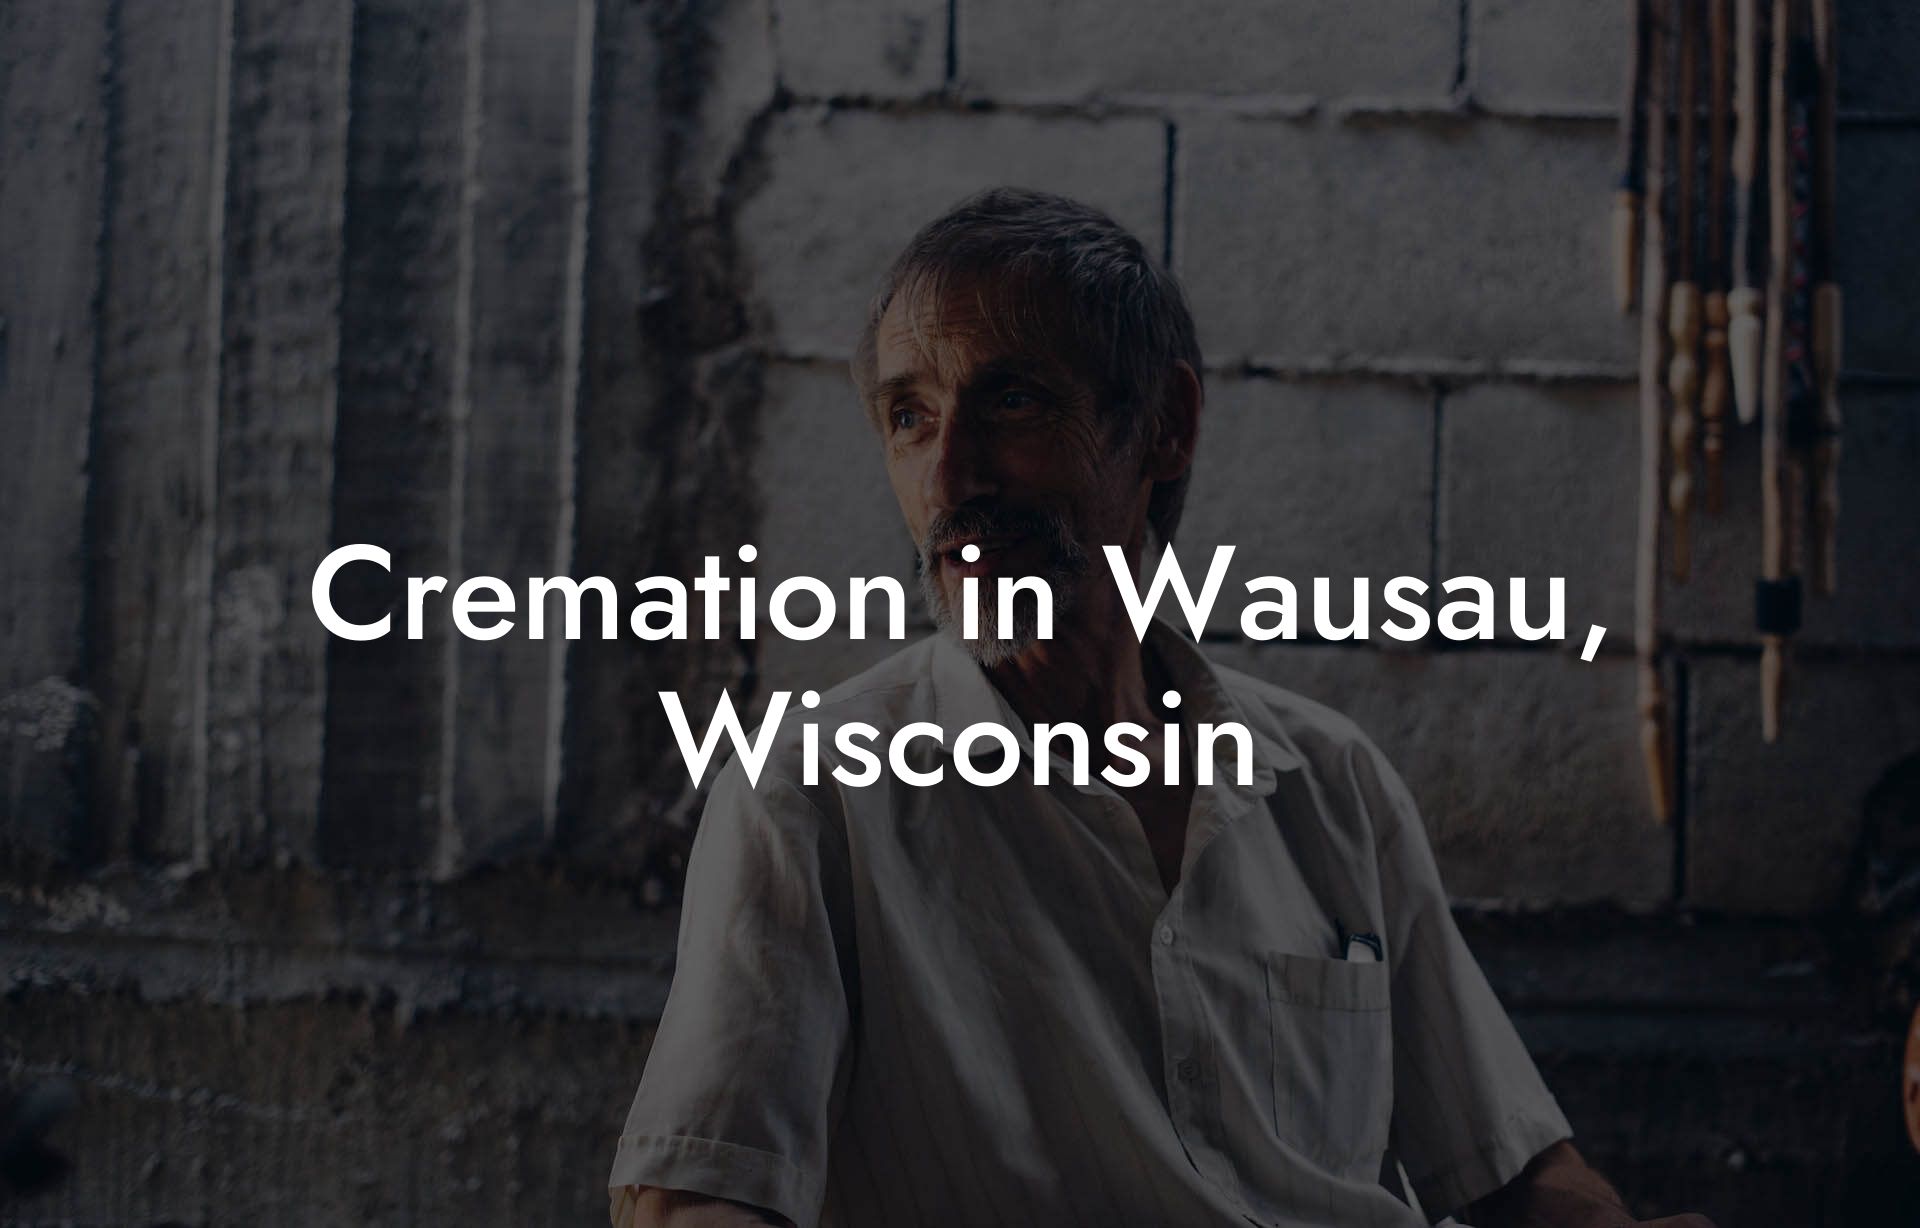 Cremation in Wausau, Wisconsin